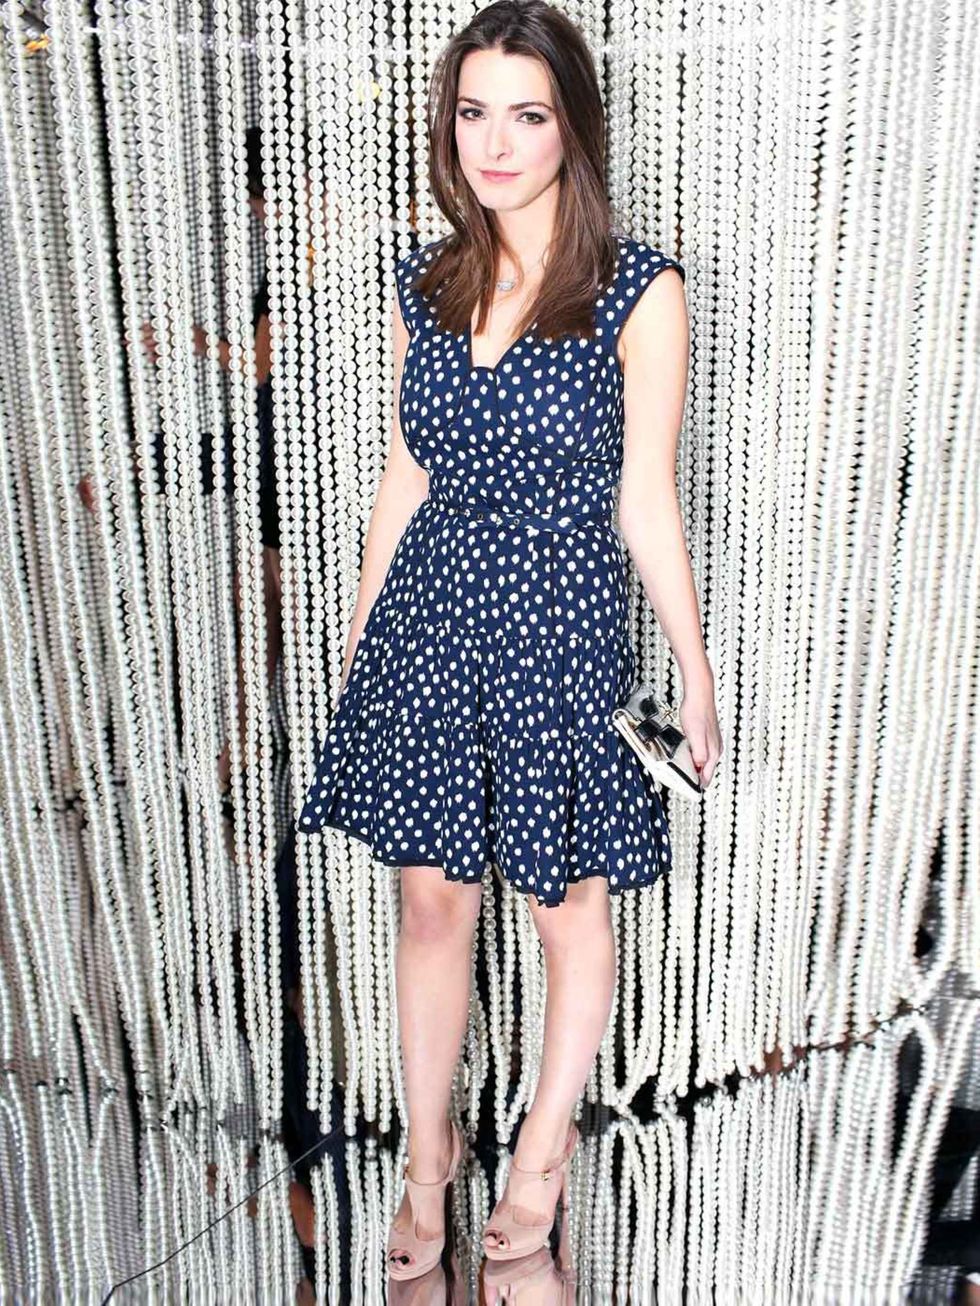 <p>Bee Shaffer at the Chanel party in Las Vegas.</p>